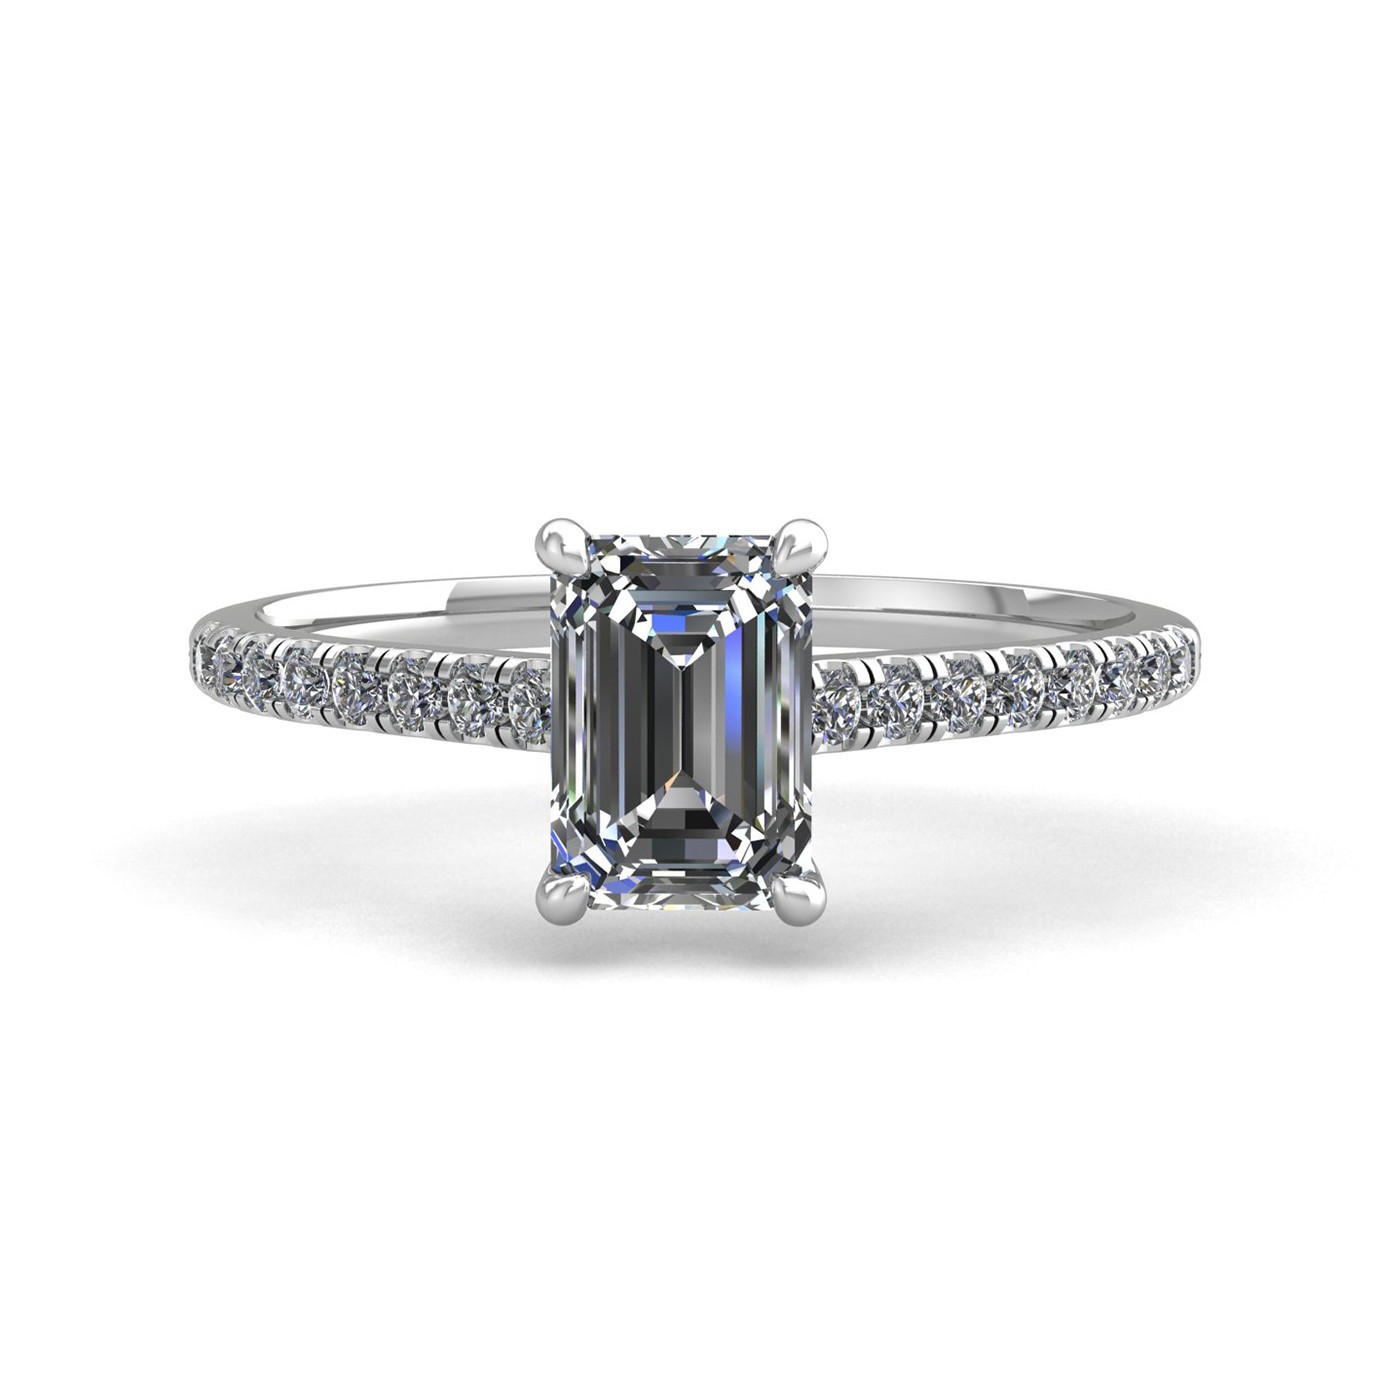 18k white gold 1.5ct 4 prongs emerald cut diamond engagement ring with whisper thin pavÉ set band Photos & images